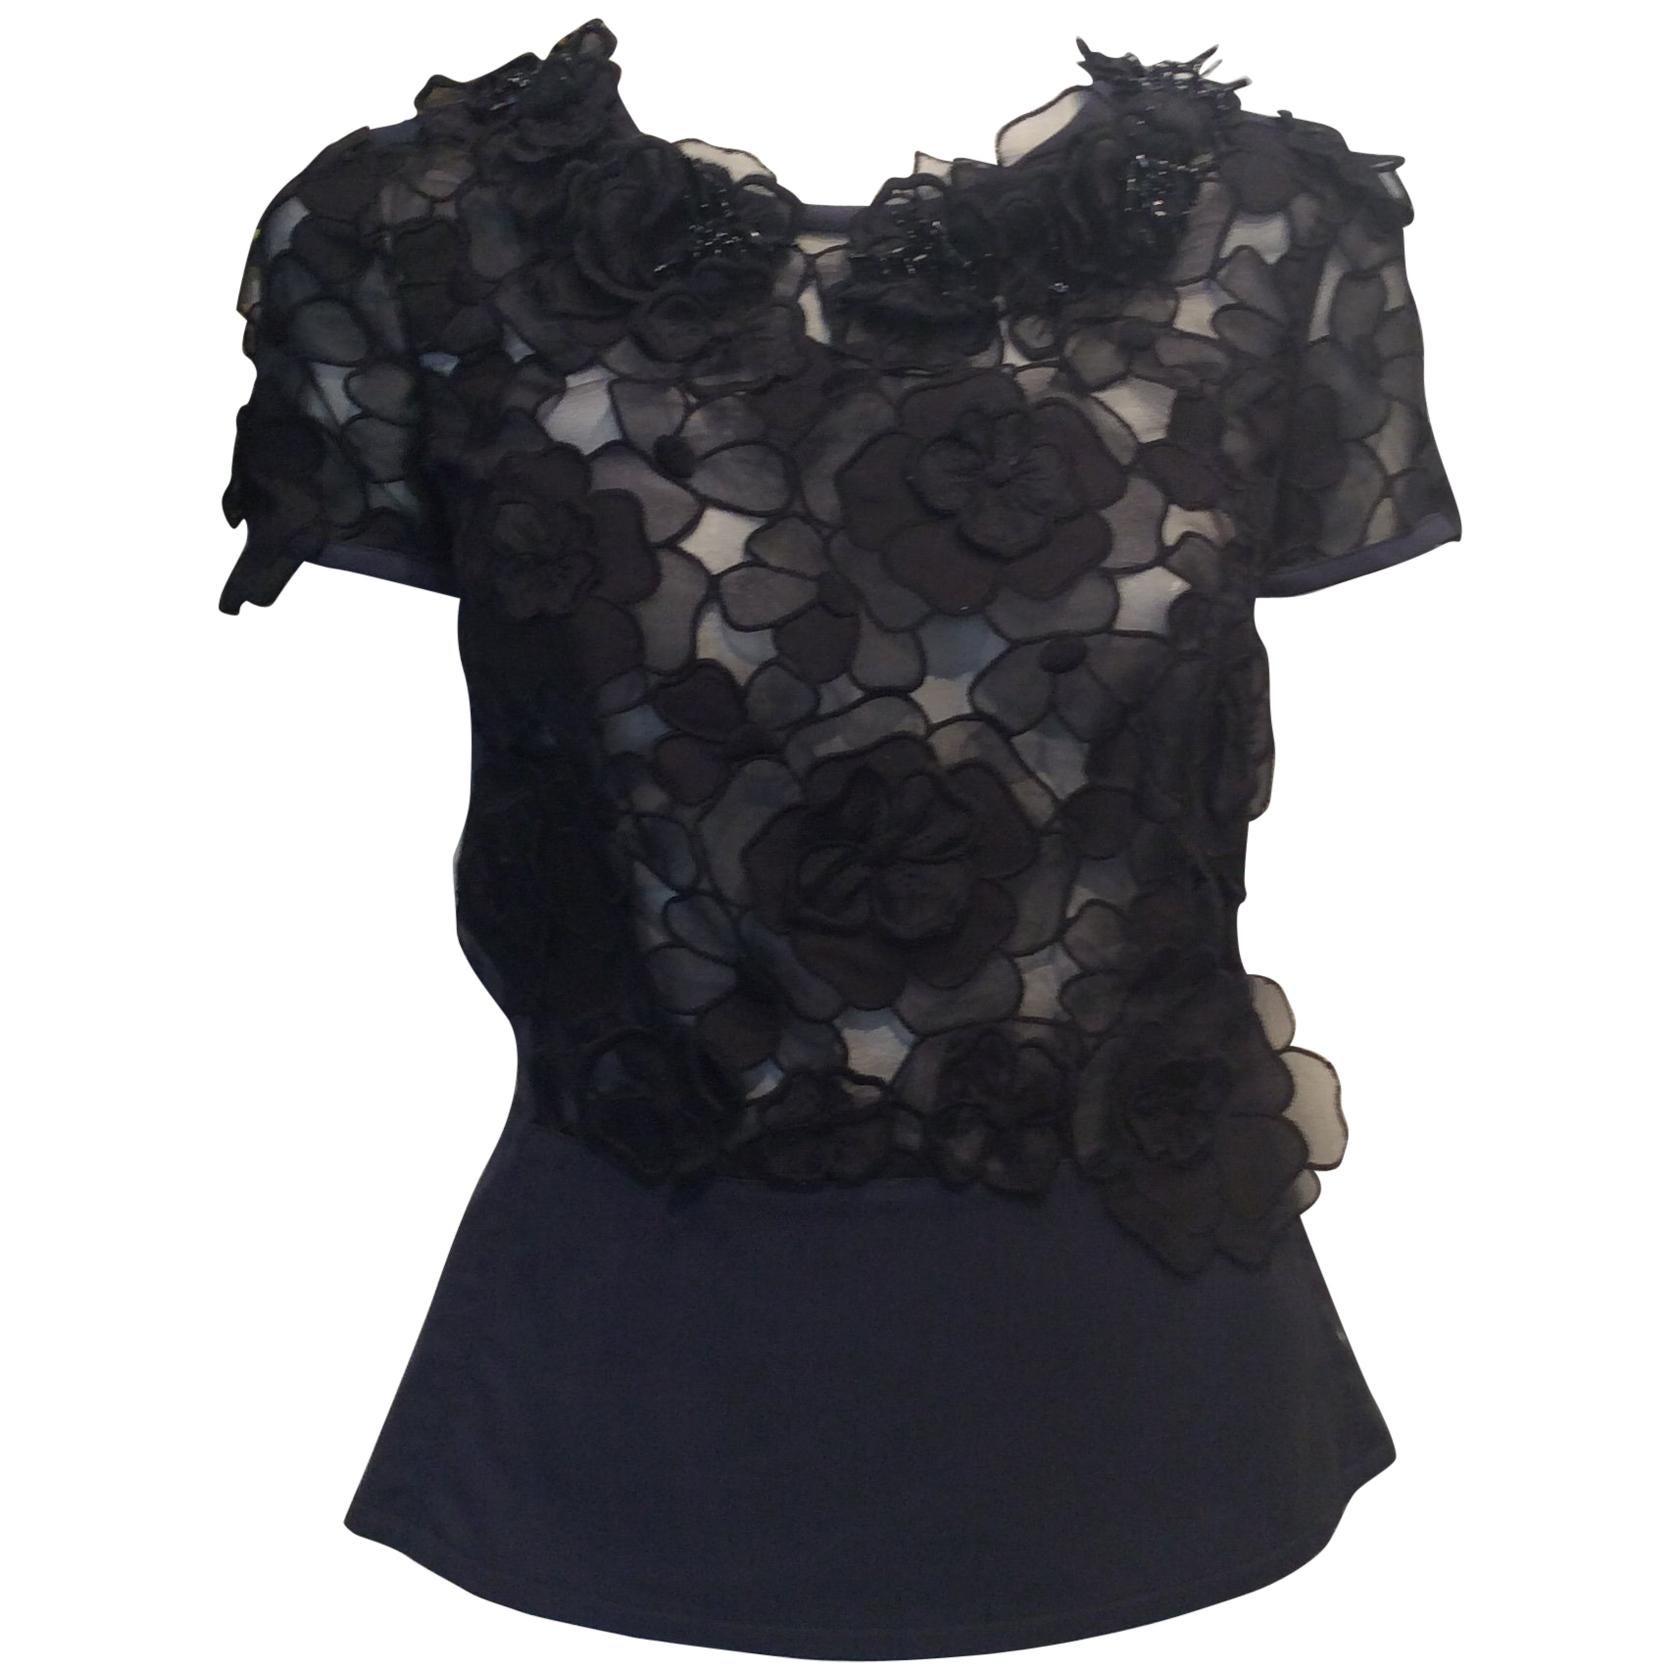 Louis Vuitton Navy and Black Semi Sheer Top w/ Flowers and Beads Sz Fr38/Us6 For Sale